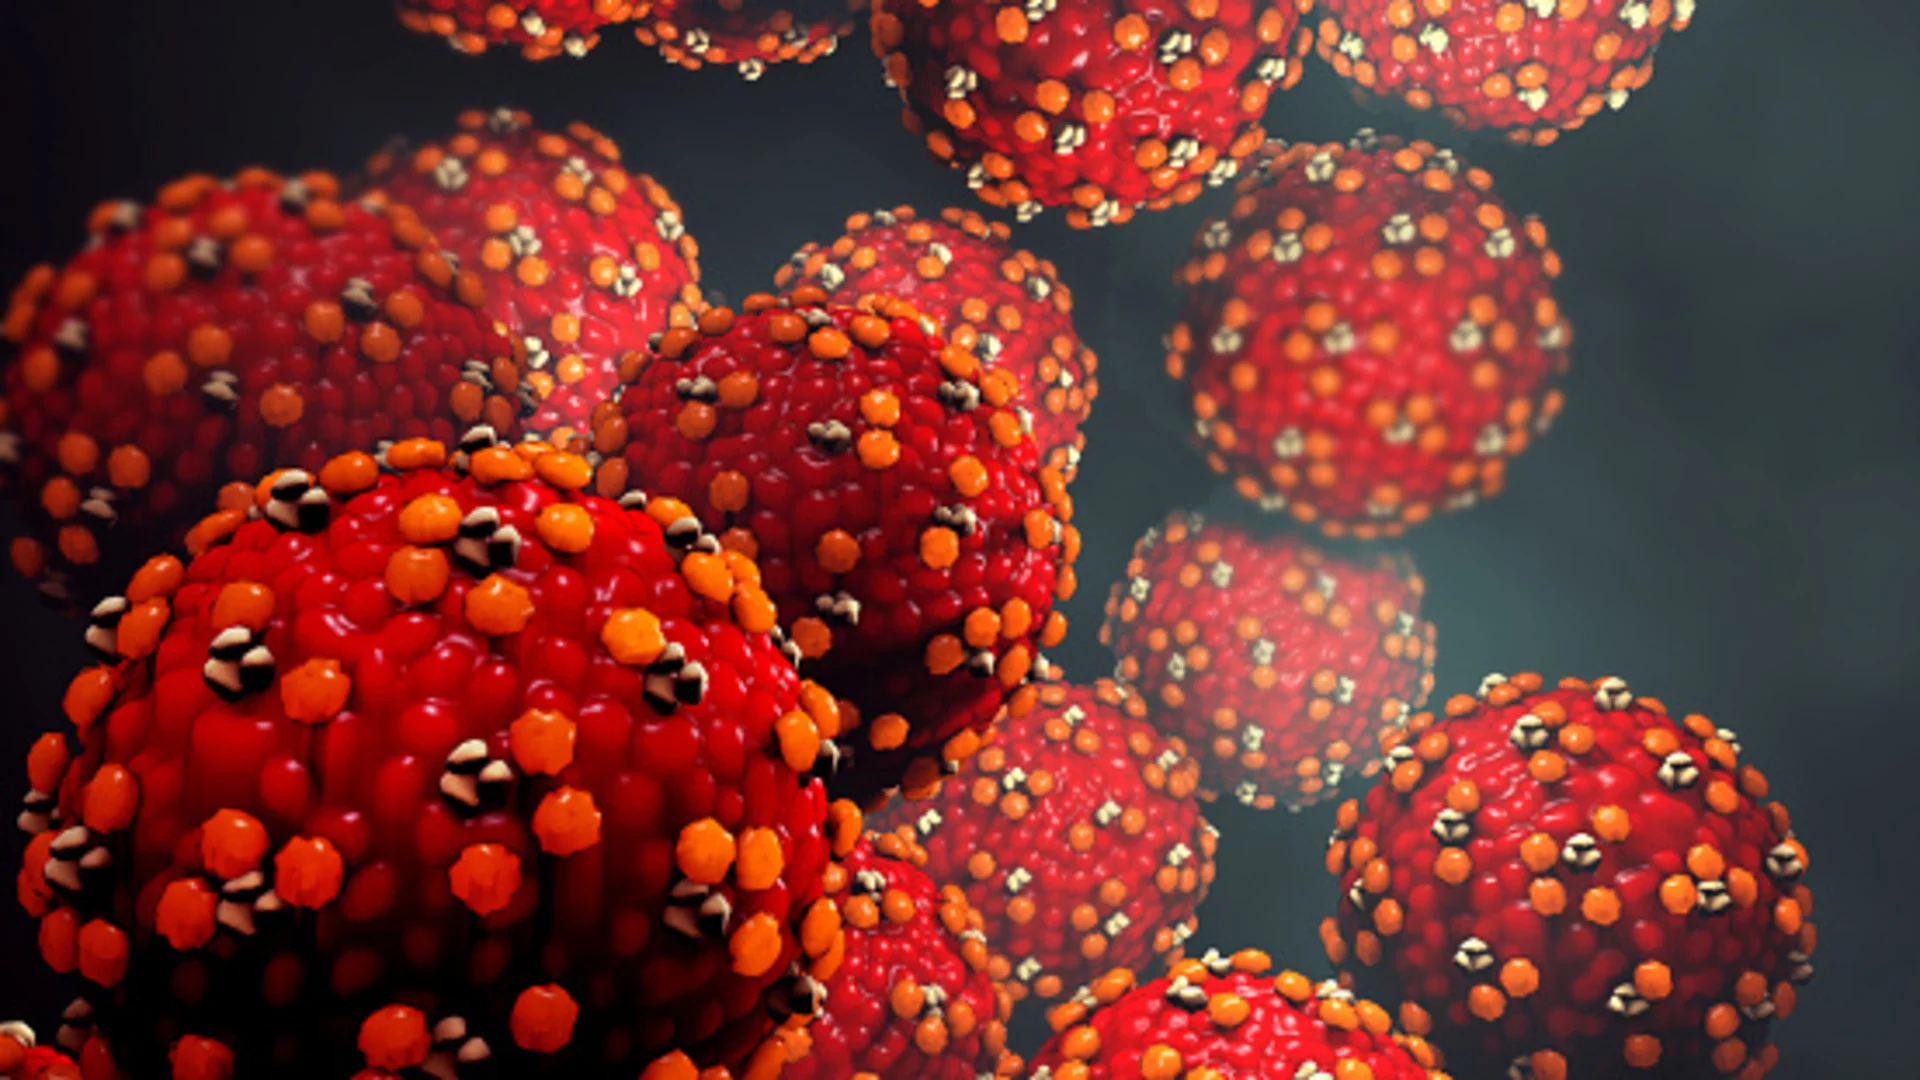 New studies highlight the link between weather and the spread of the measles virus